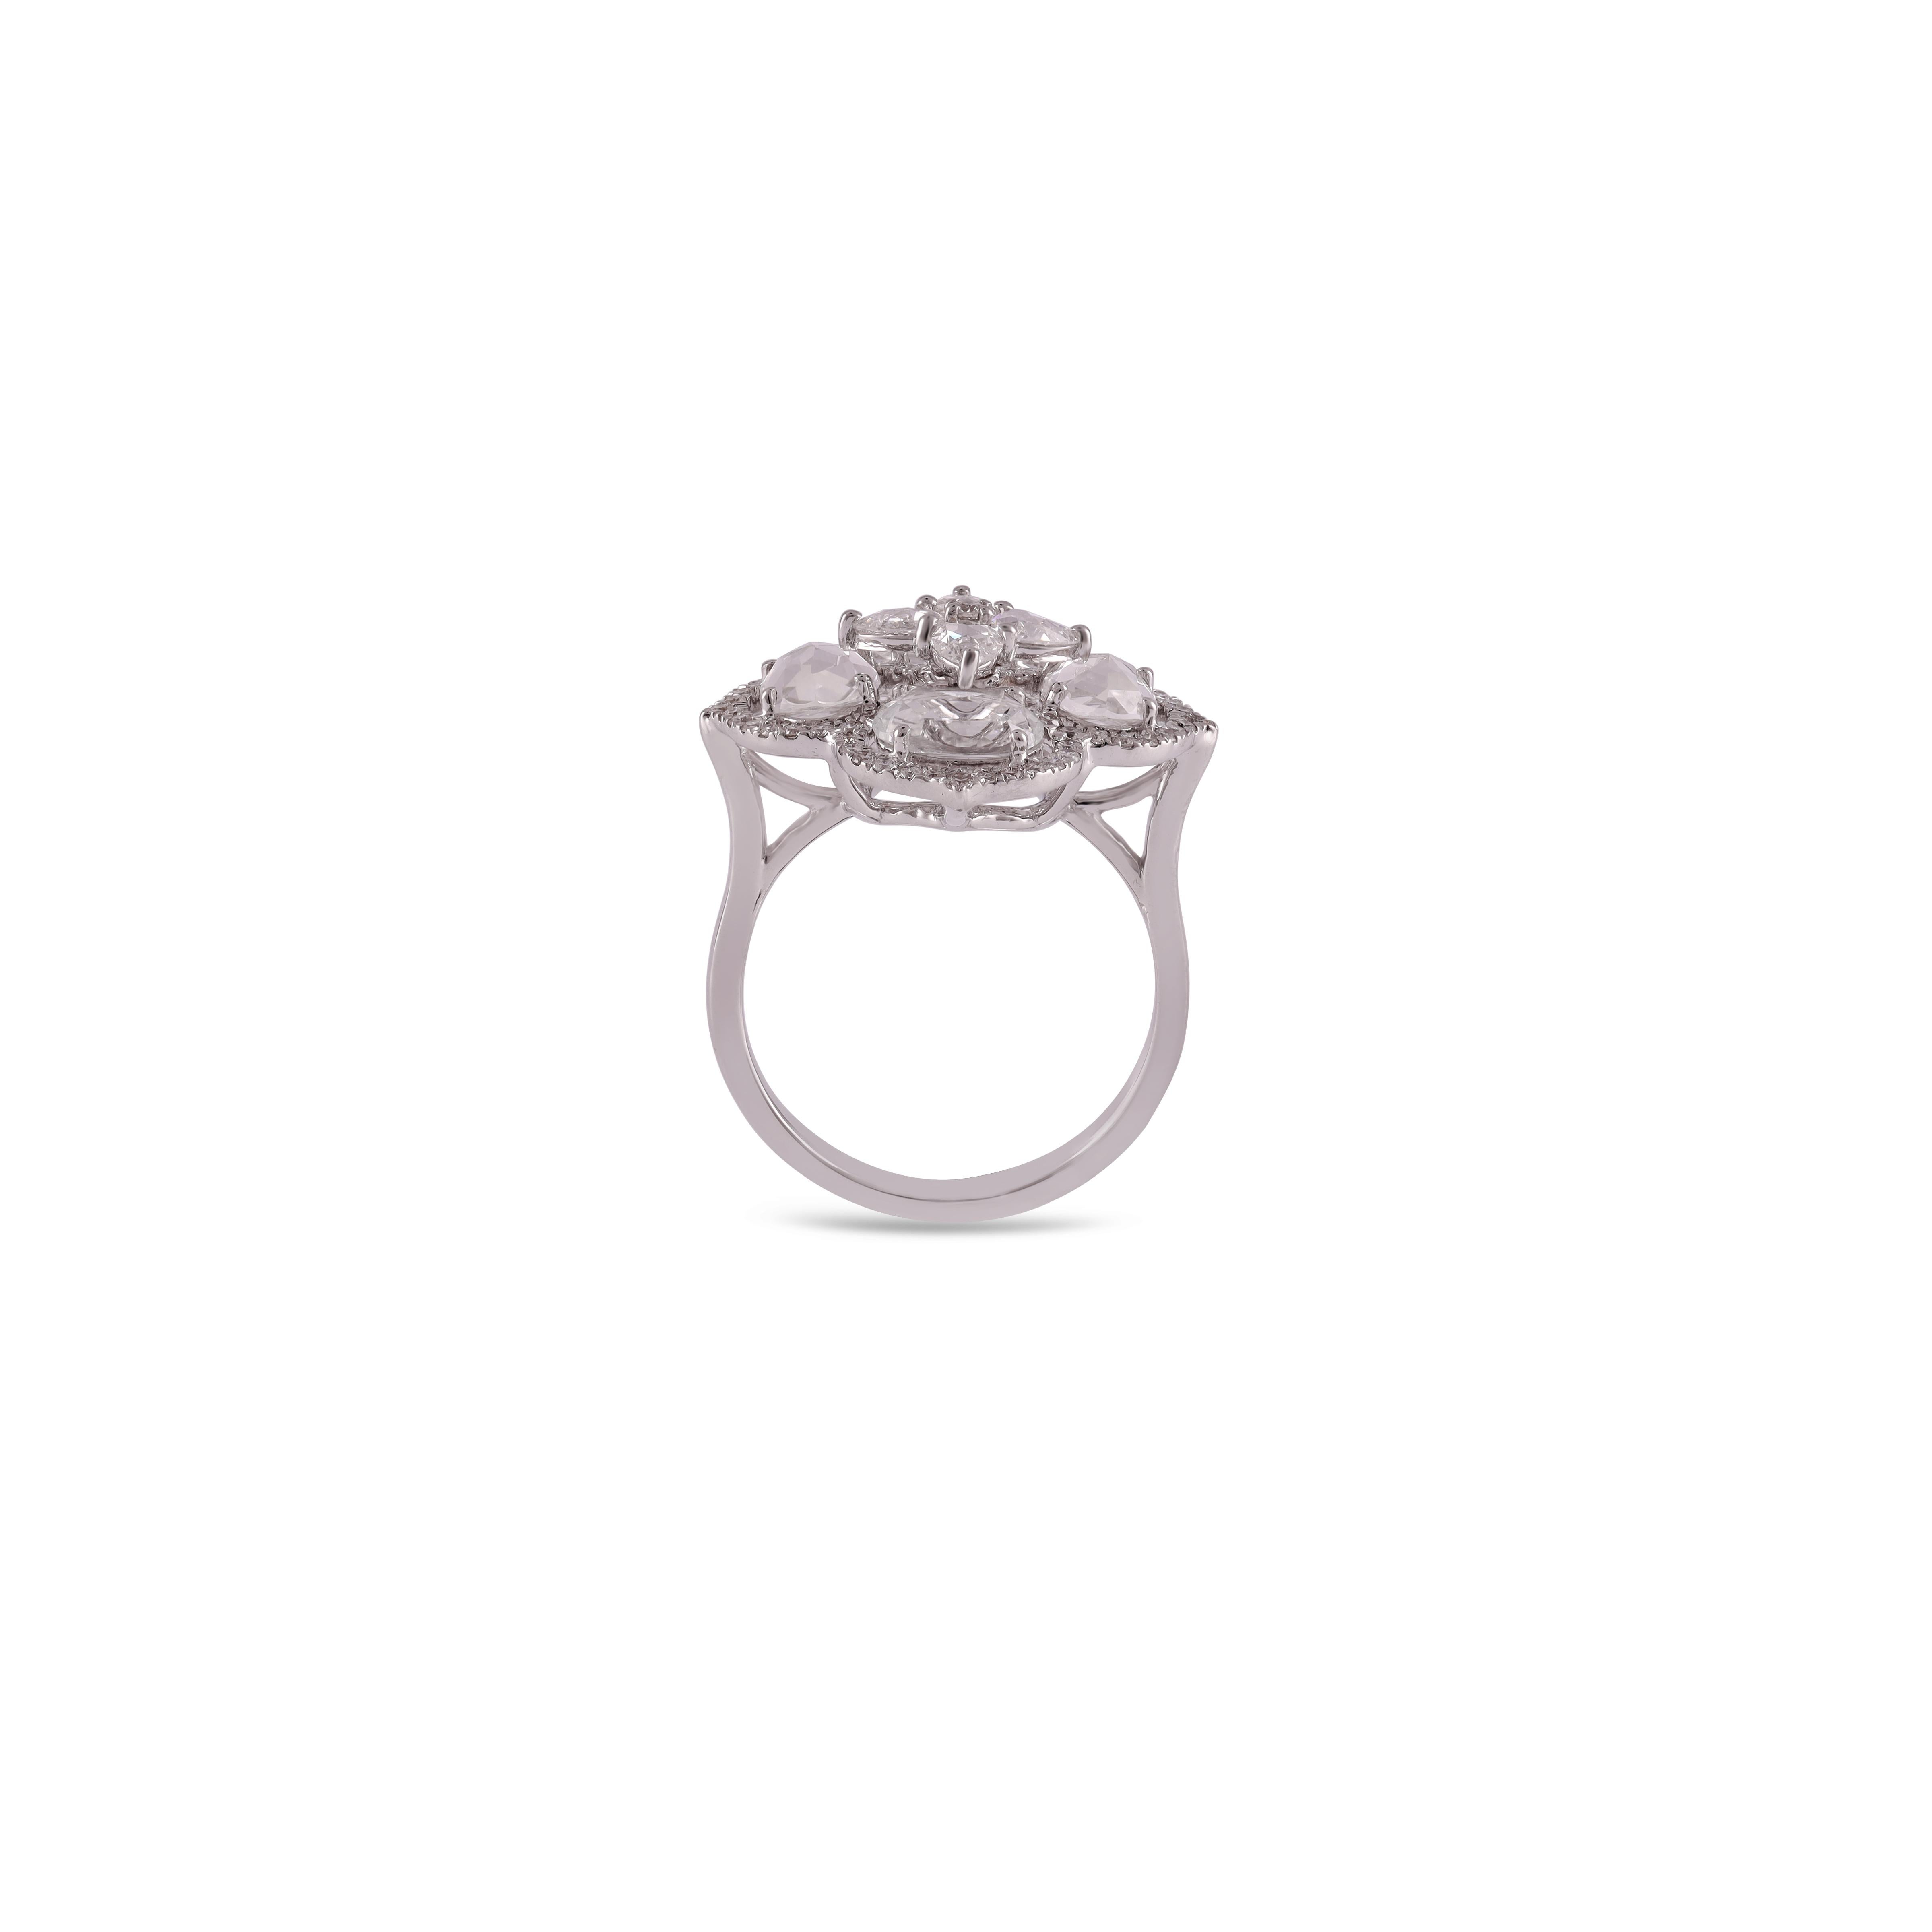 Contemporary 3.12 Carat White Sapphire and Diamond Ring in 18 Karat White Gold For Sale